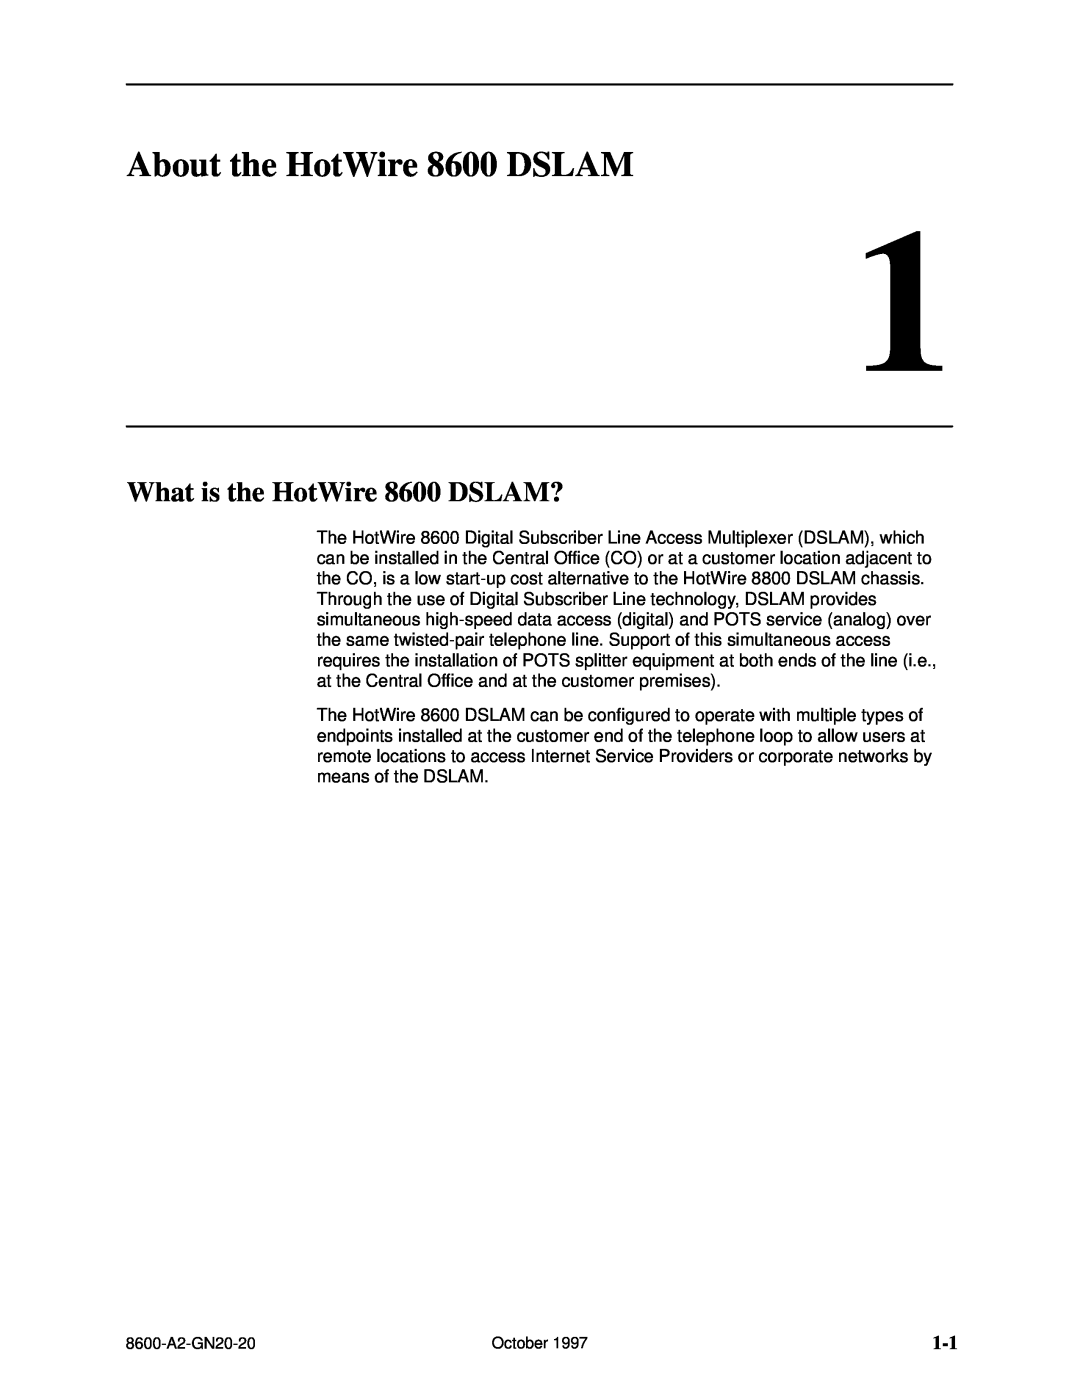 Nortel Networks manual About the HotWire 8600 DSLAM, What is the HotWire 8600 DSLAM? 